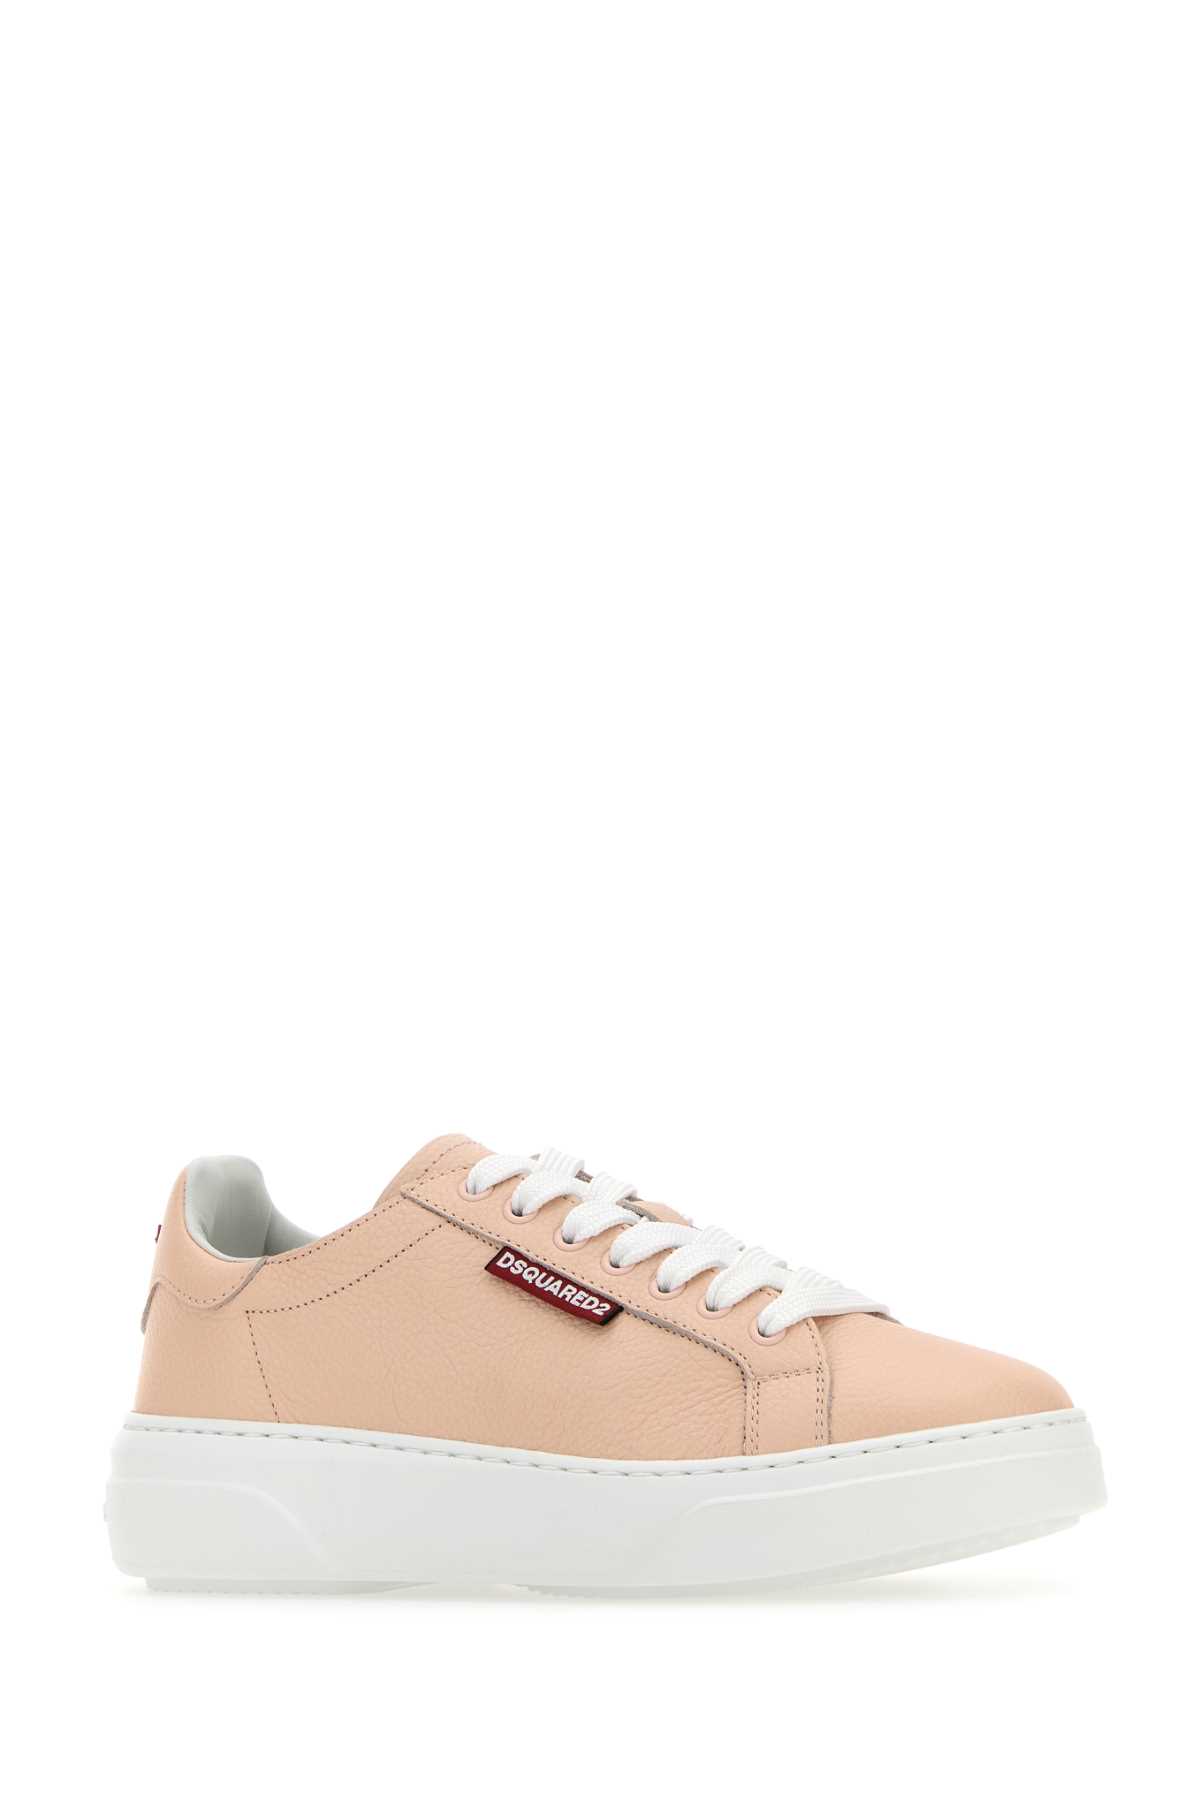 Shop Dsquared2 Light Pink Leather Bumper Sneakers